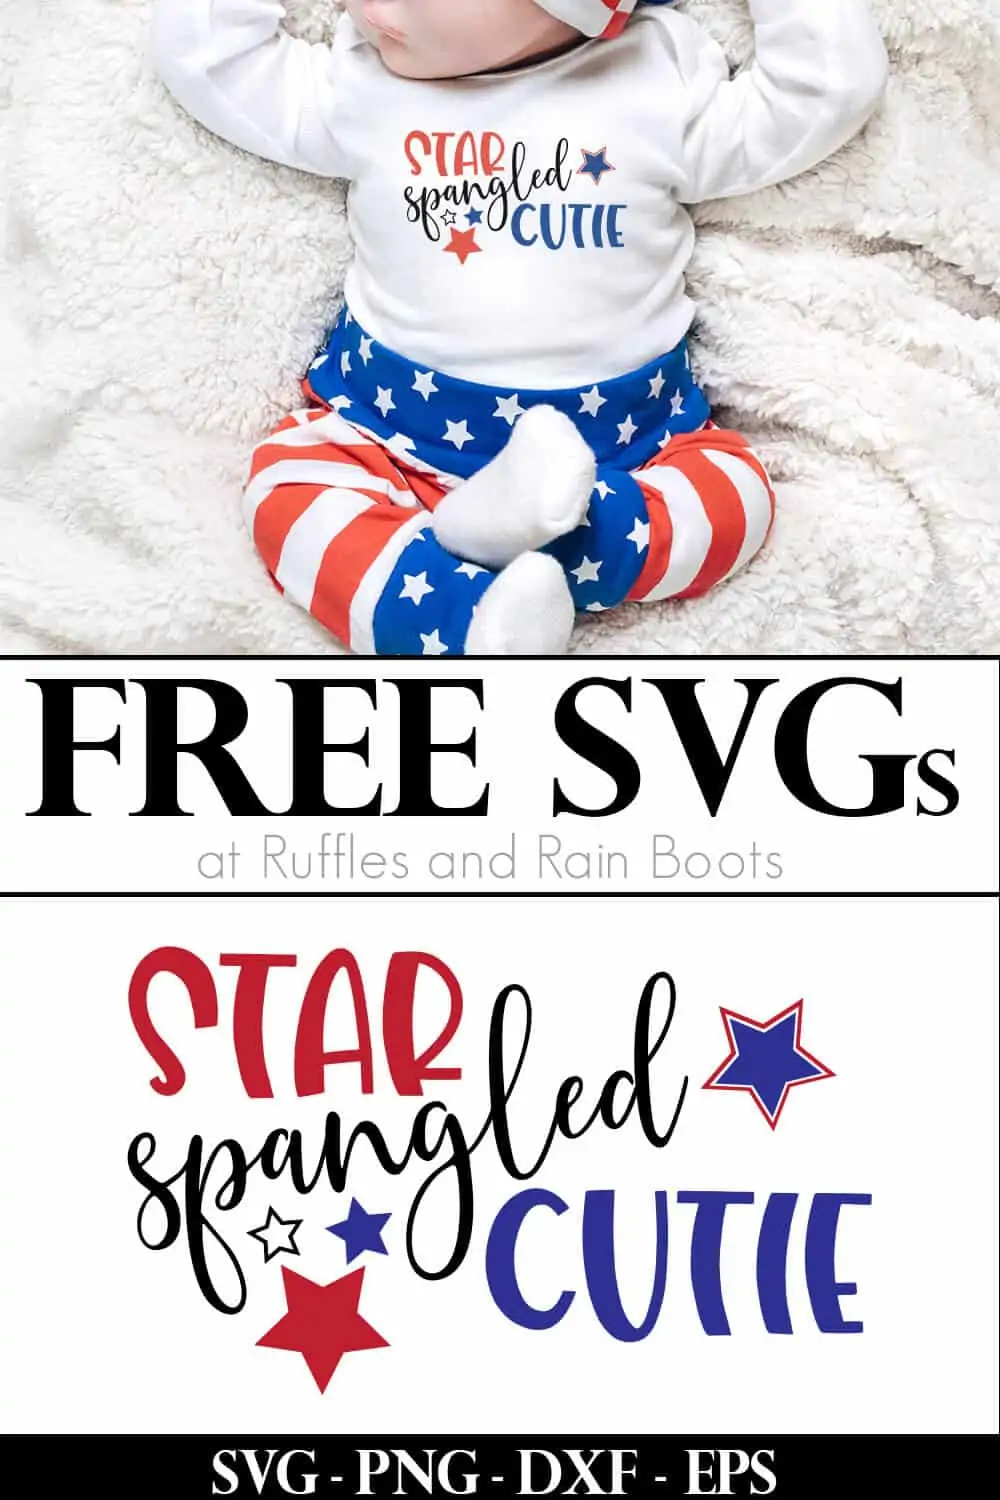 adorable onesie with red white and blue star spangled cutie svg and flag pants on white blanket with text which reads free svgs at Ruffles and Rain Boots